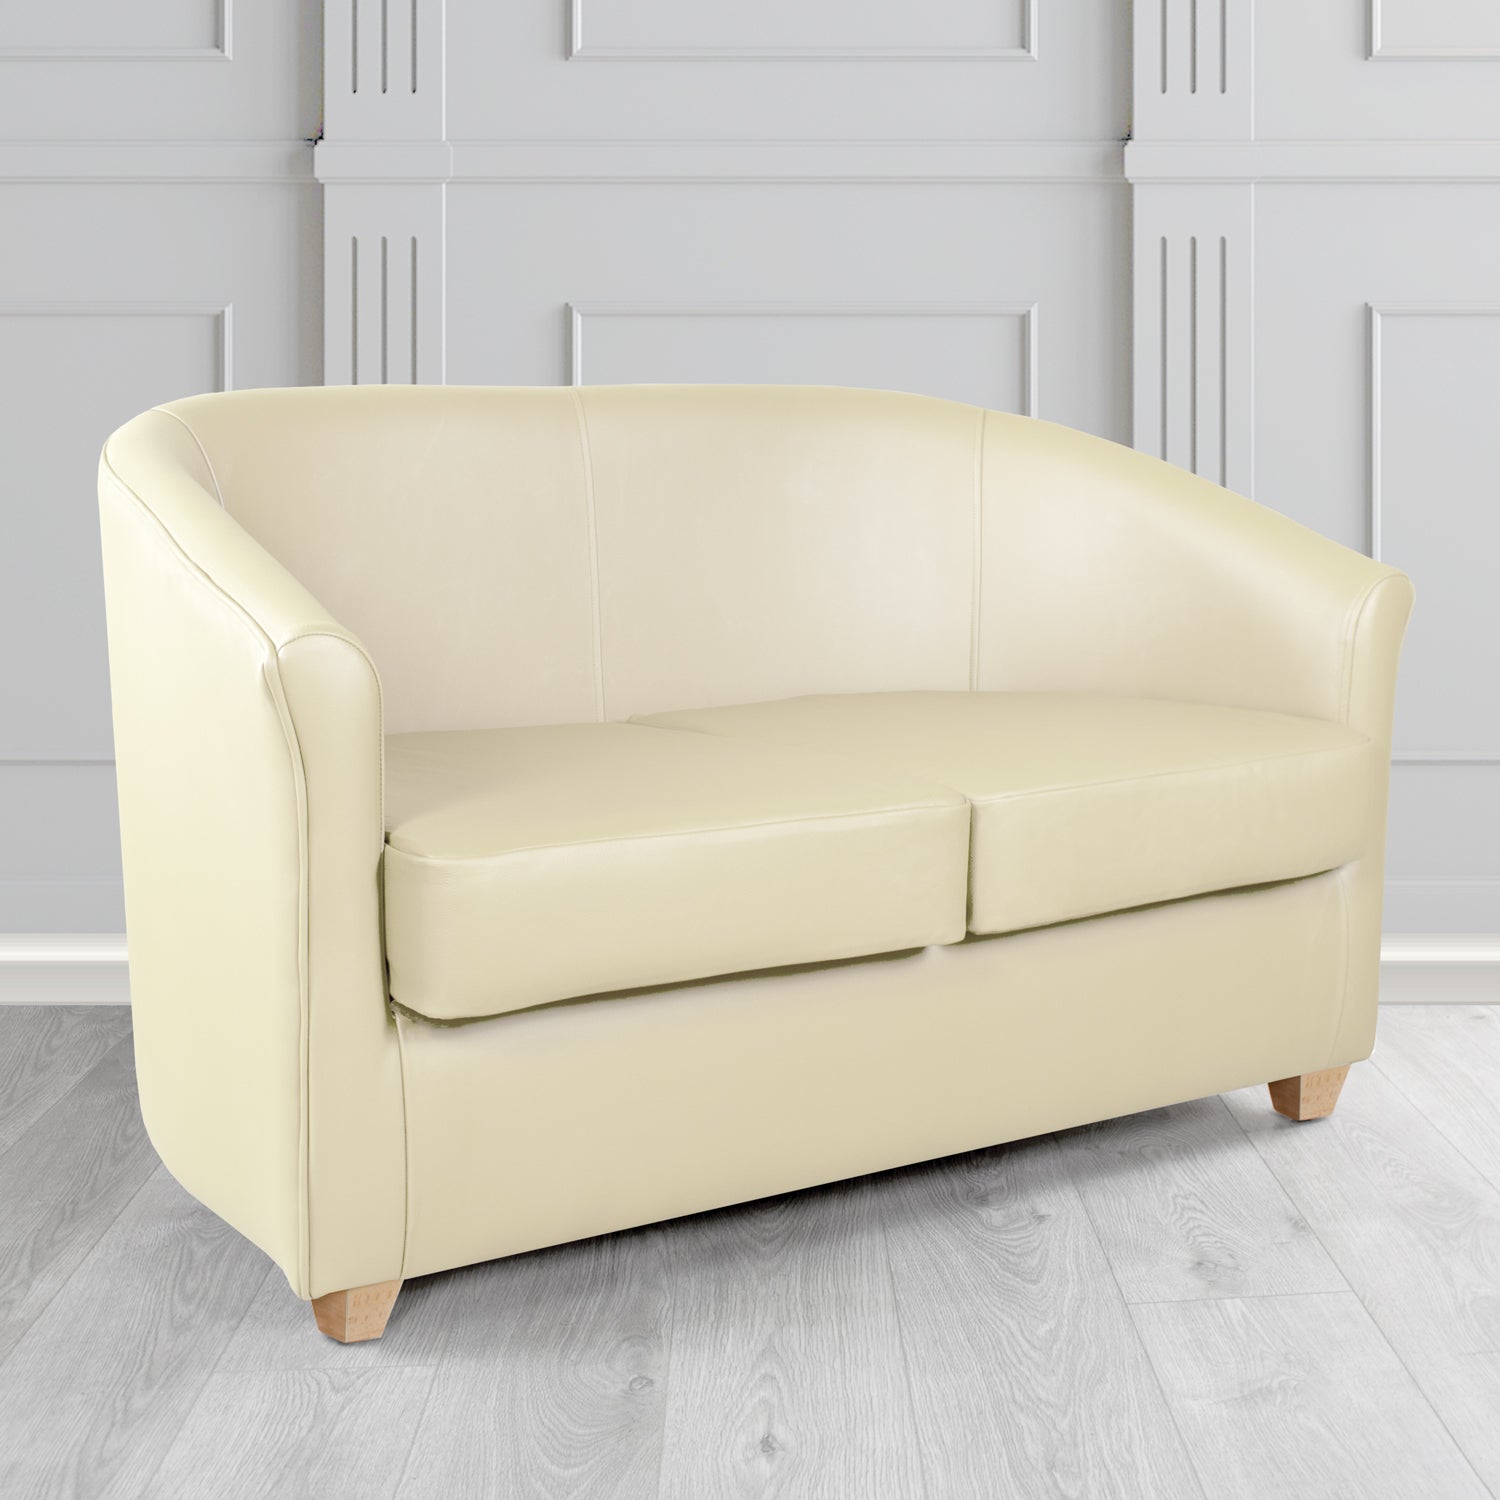 Cannes 2 Seater Tub Sofa in Madrid Cream Faux Leather - The Tub Chair Shop